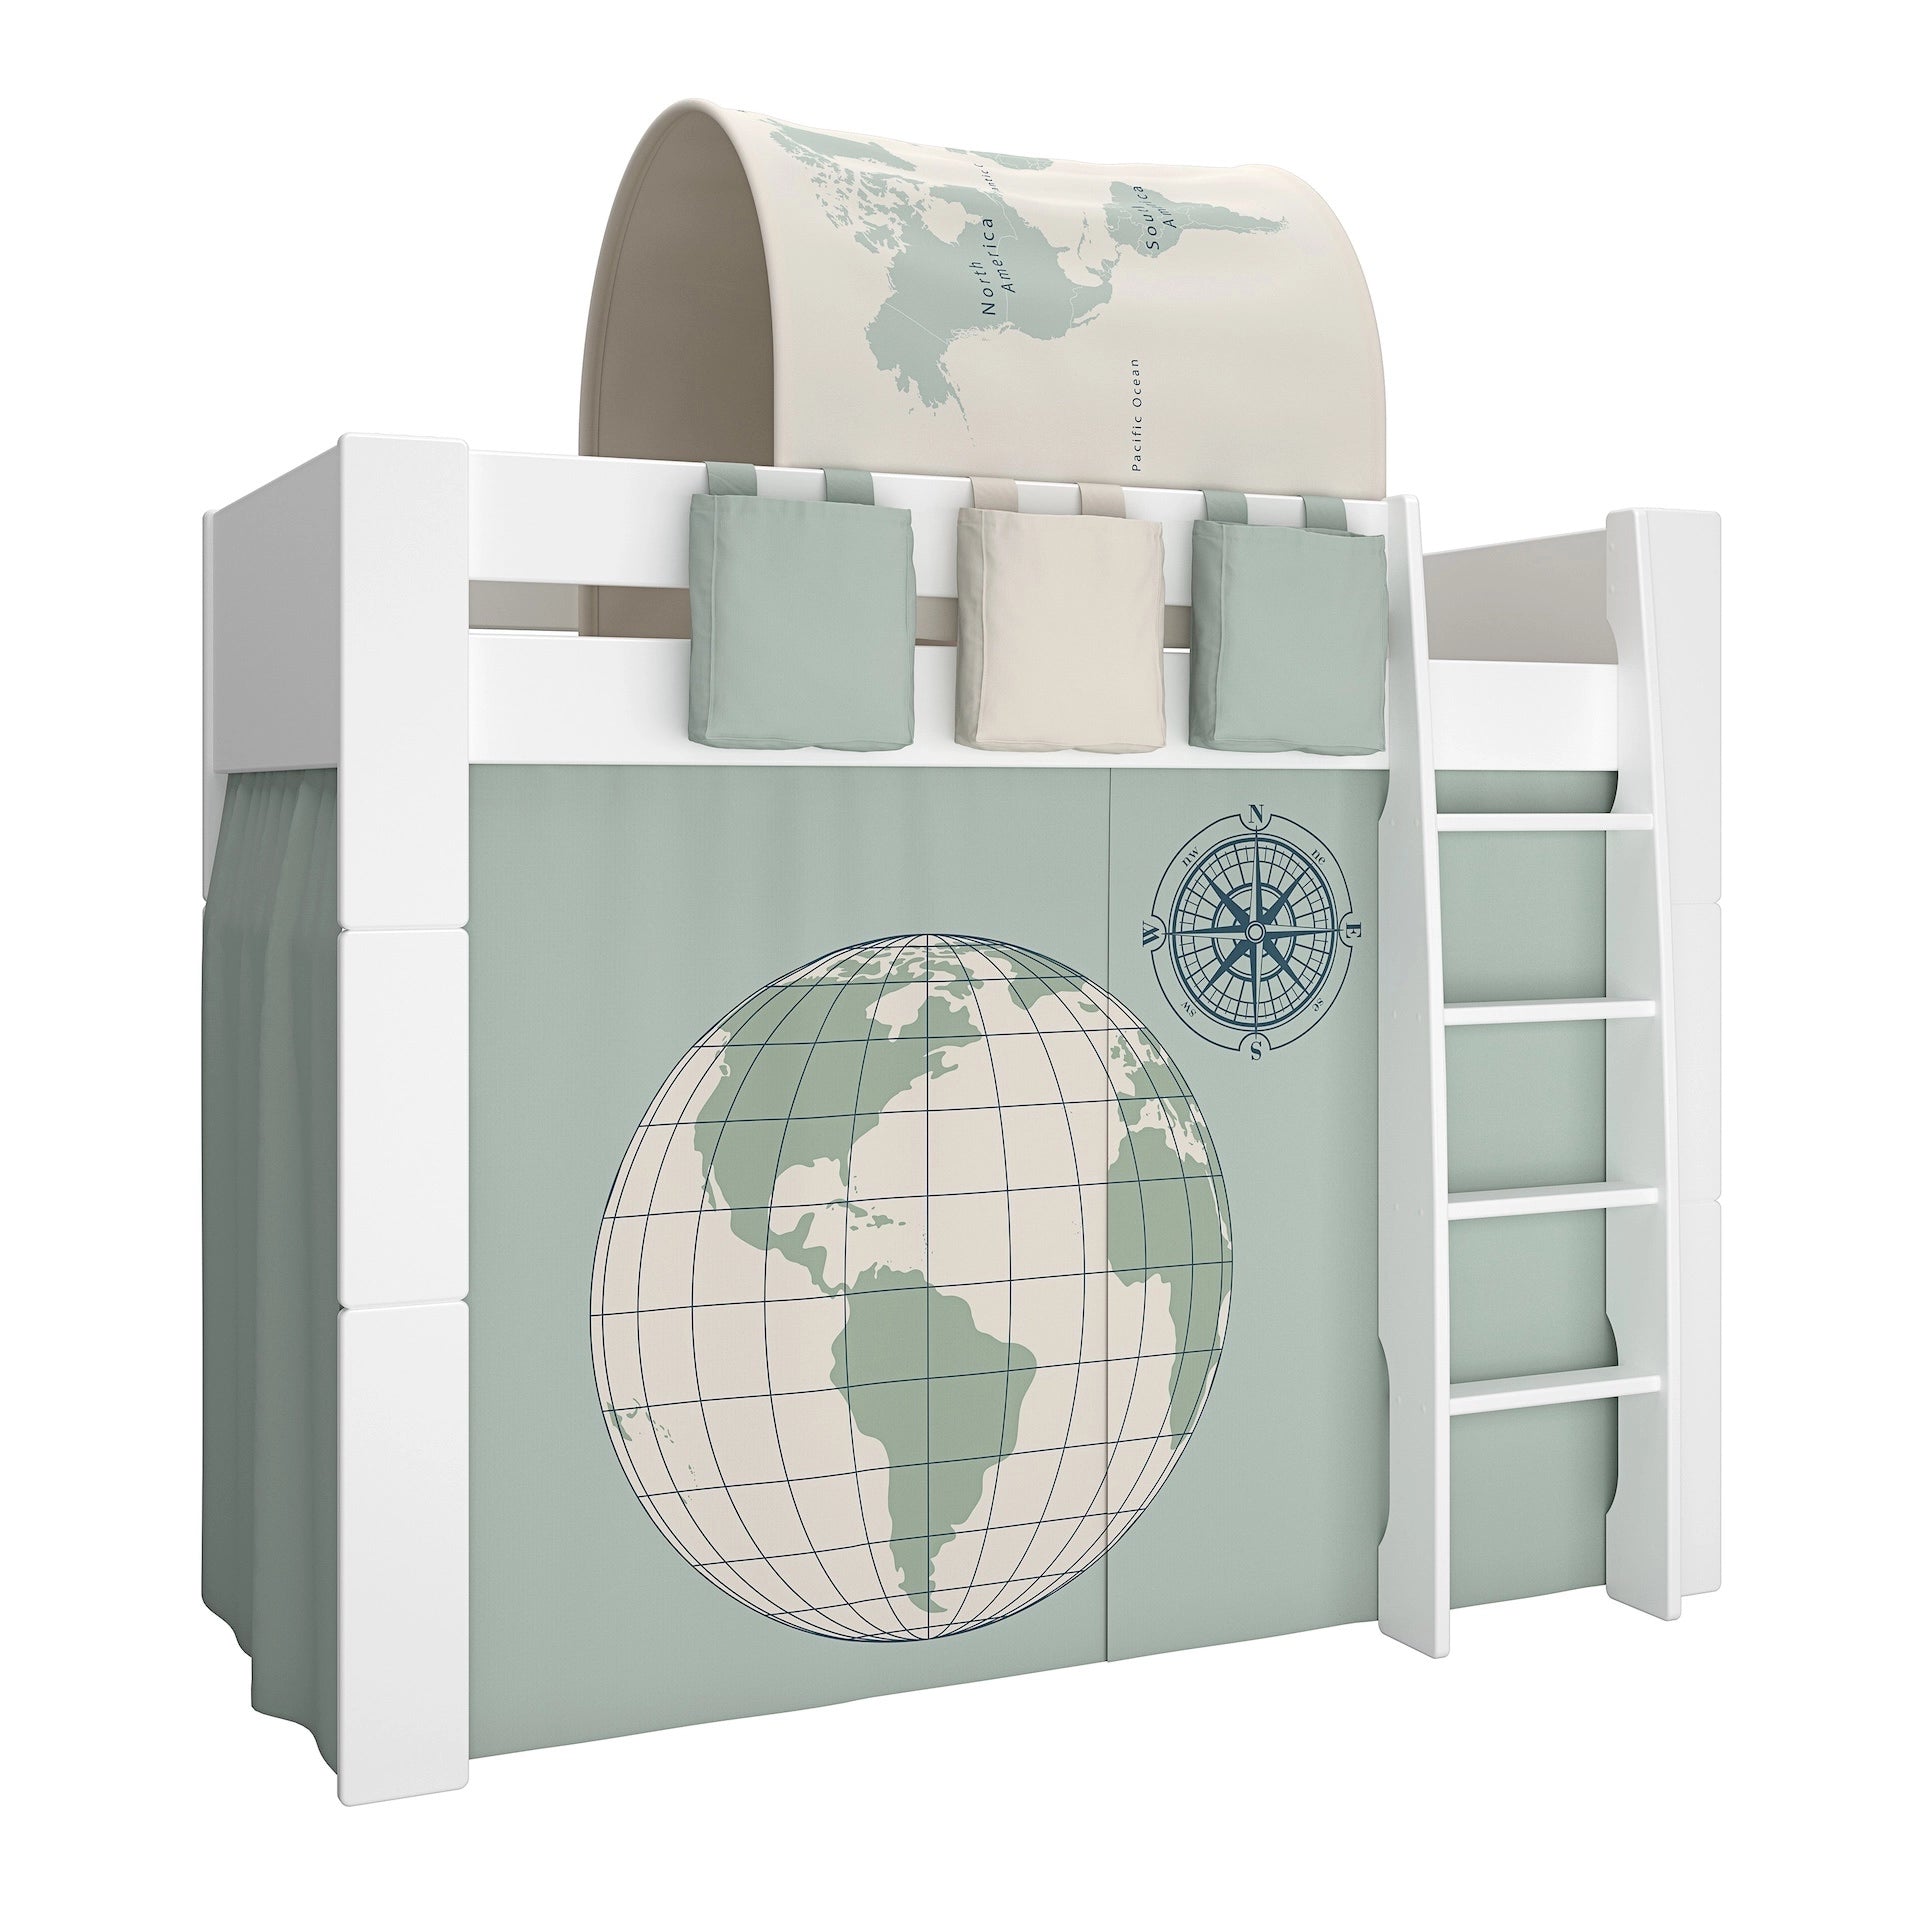 Furniture To Go Steens For Kids High Sleeper in Whitewash Grey Brown Lacquered, Includes - World Tent + Tunnel + 2 Pockets in Green + 1 Pocket in Sand